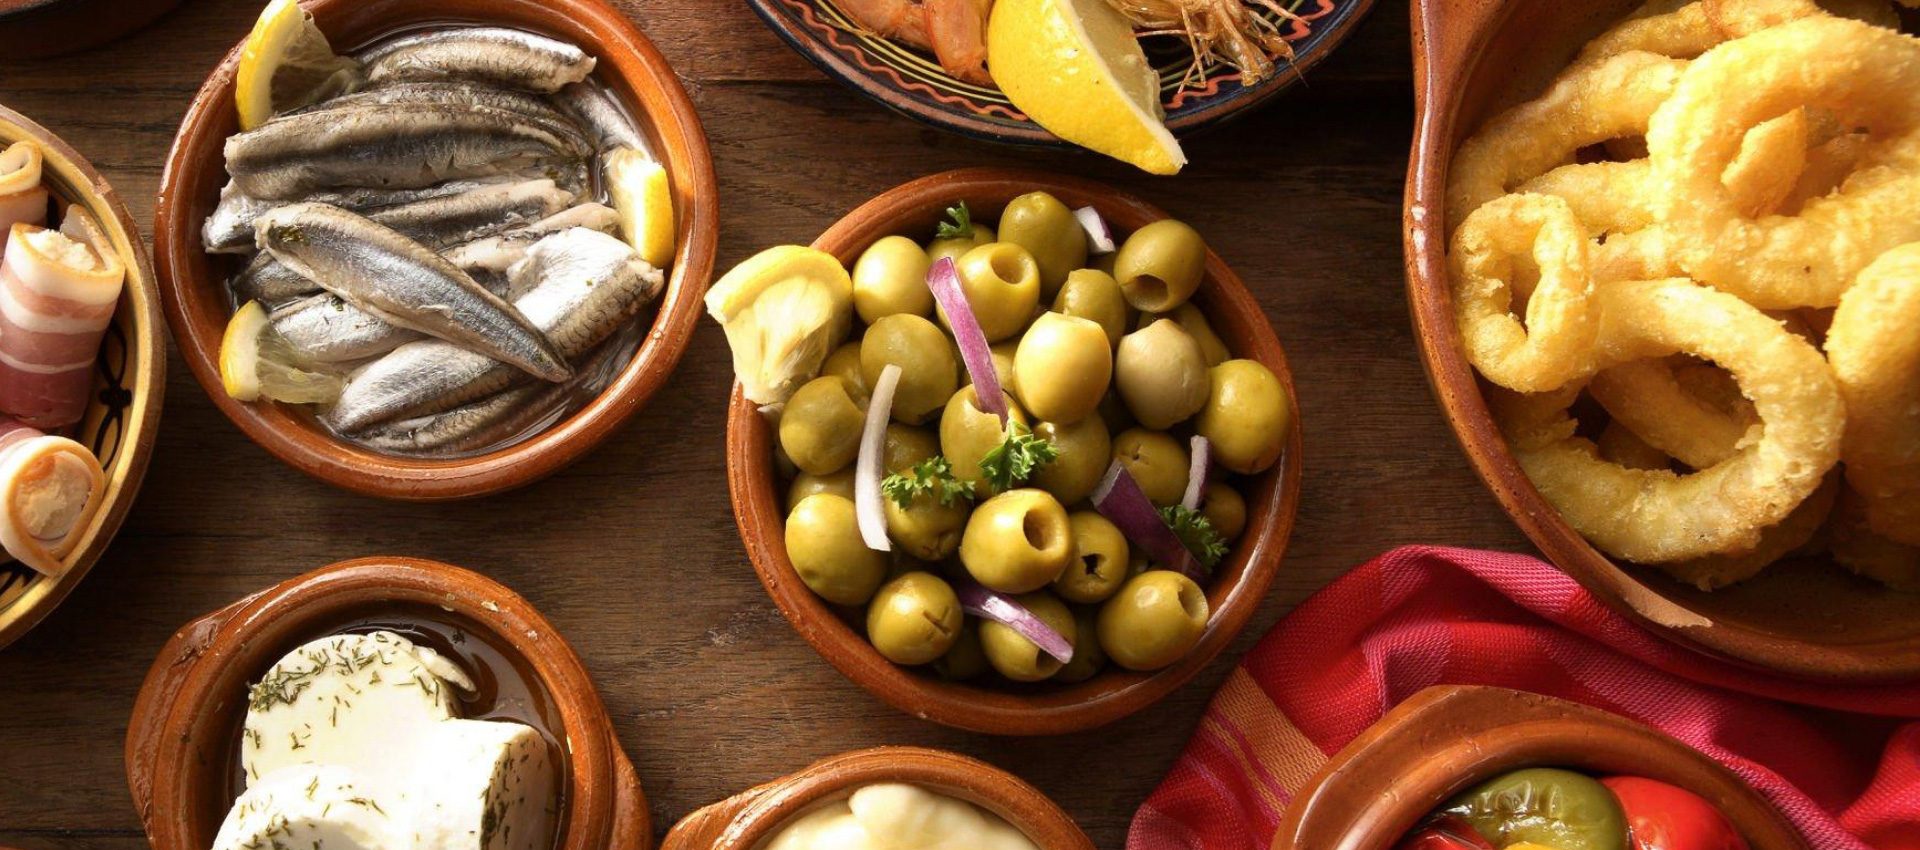 Different small dishes with typical and tasty tapas from our food experience.